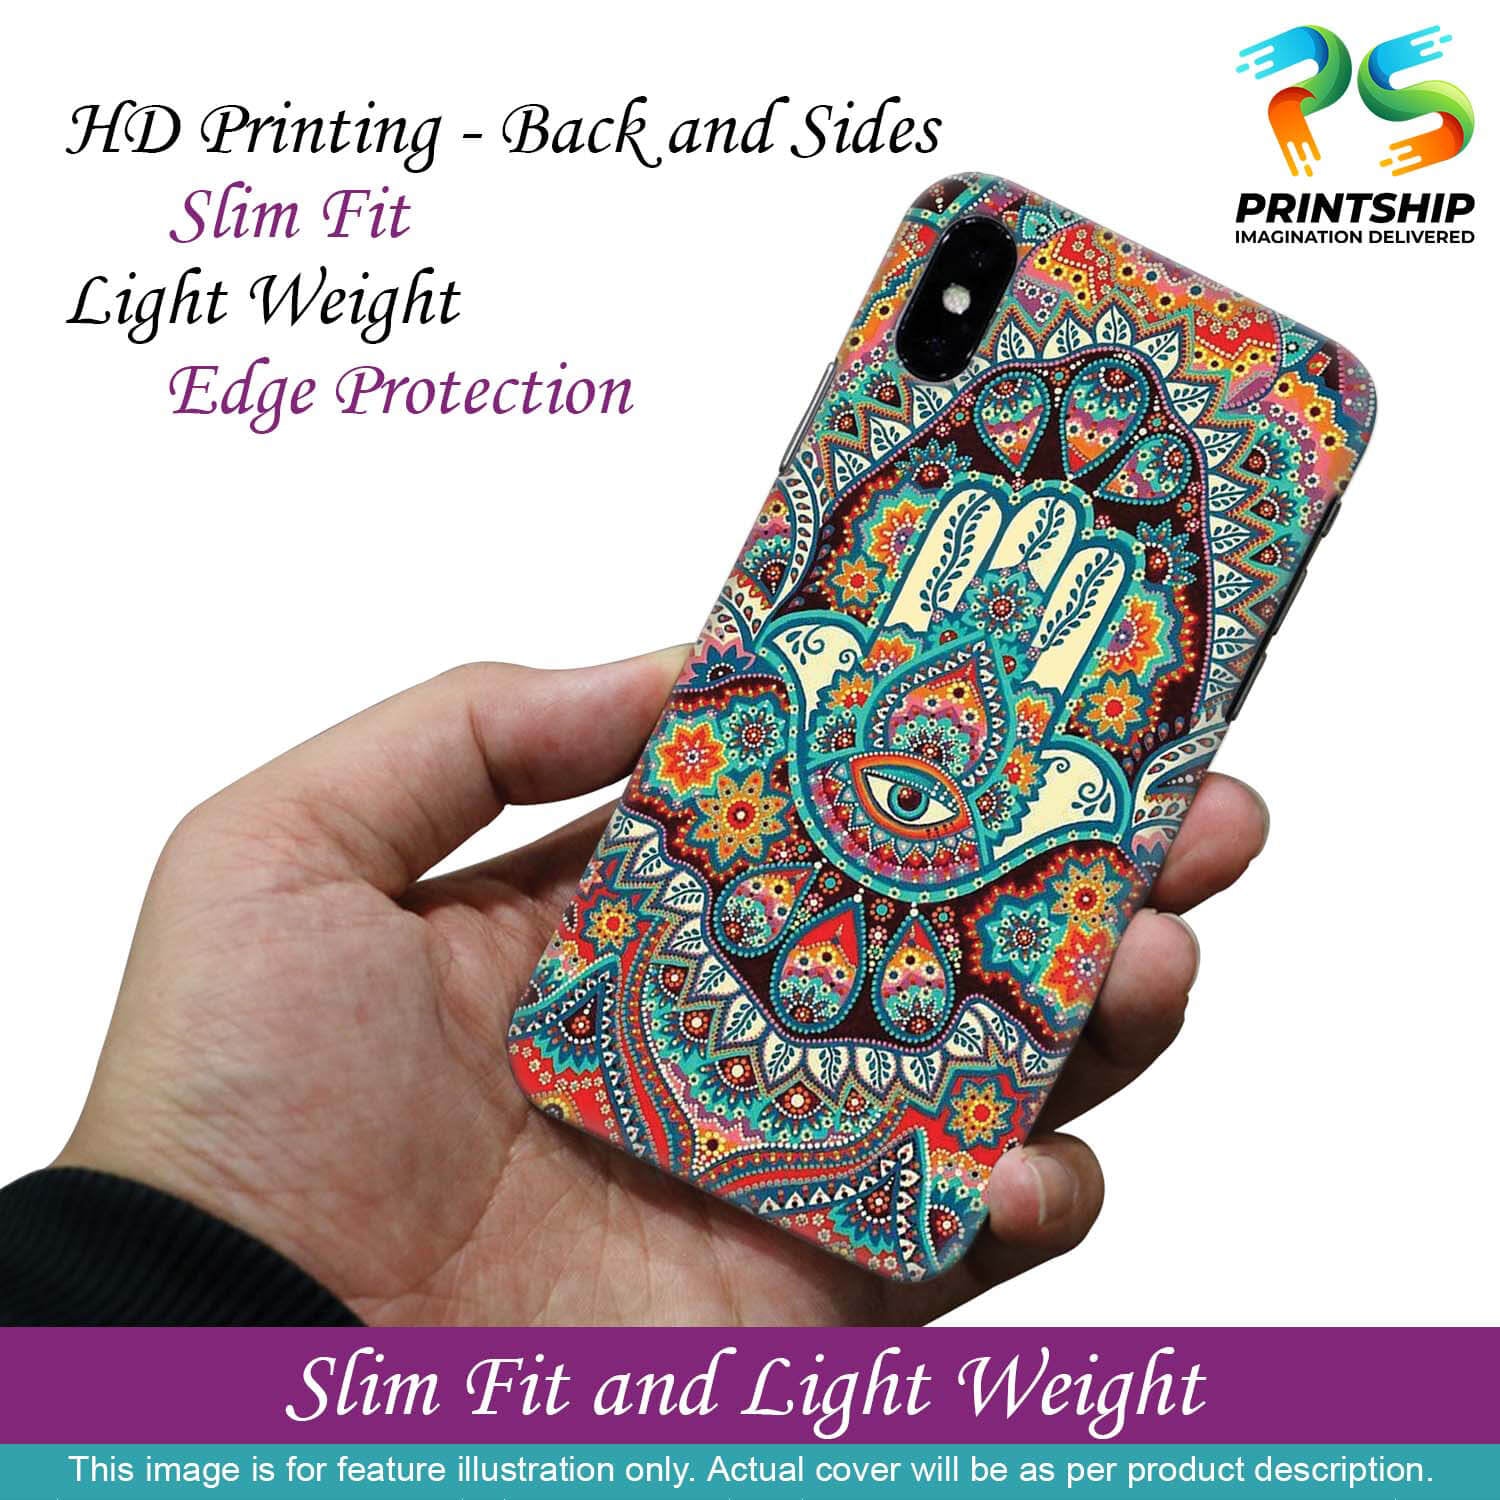 PS1336-Eye Hands Mandala Back Cover for Apple iPhone 11 Pro